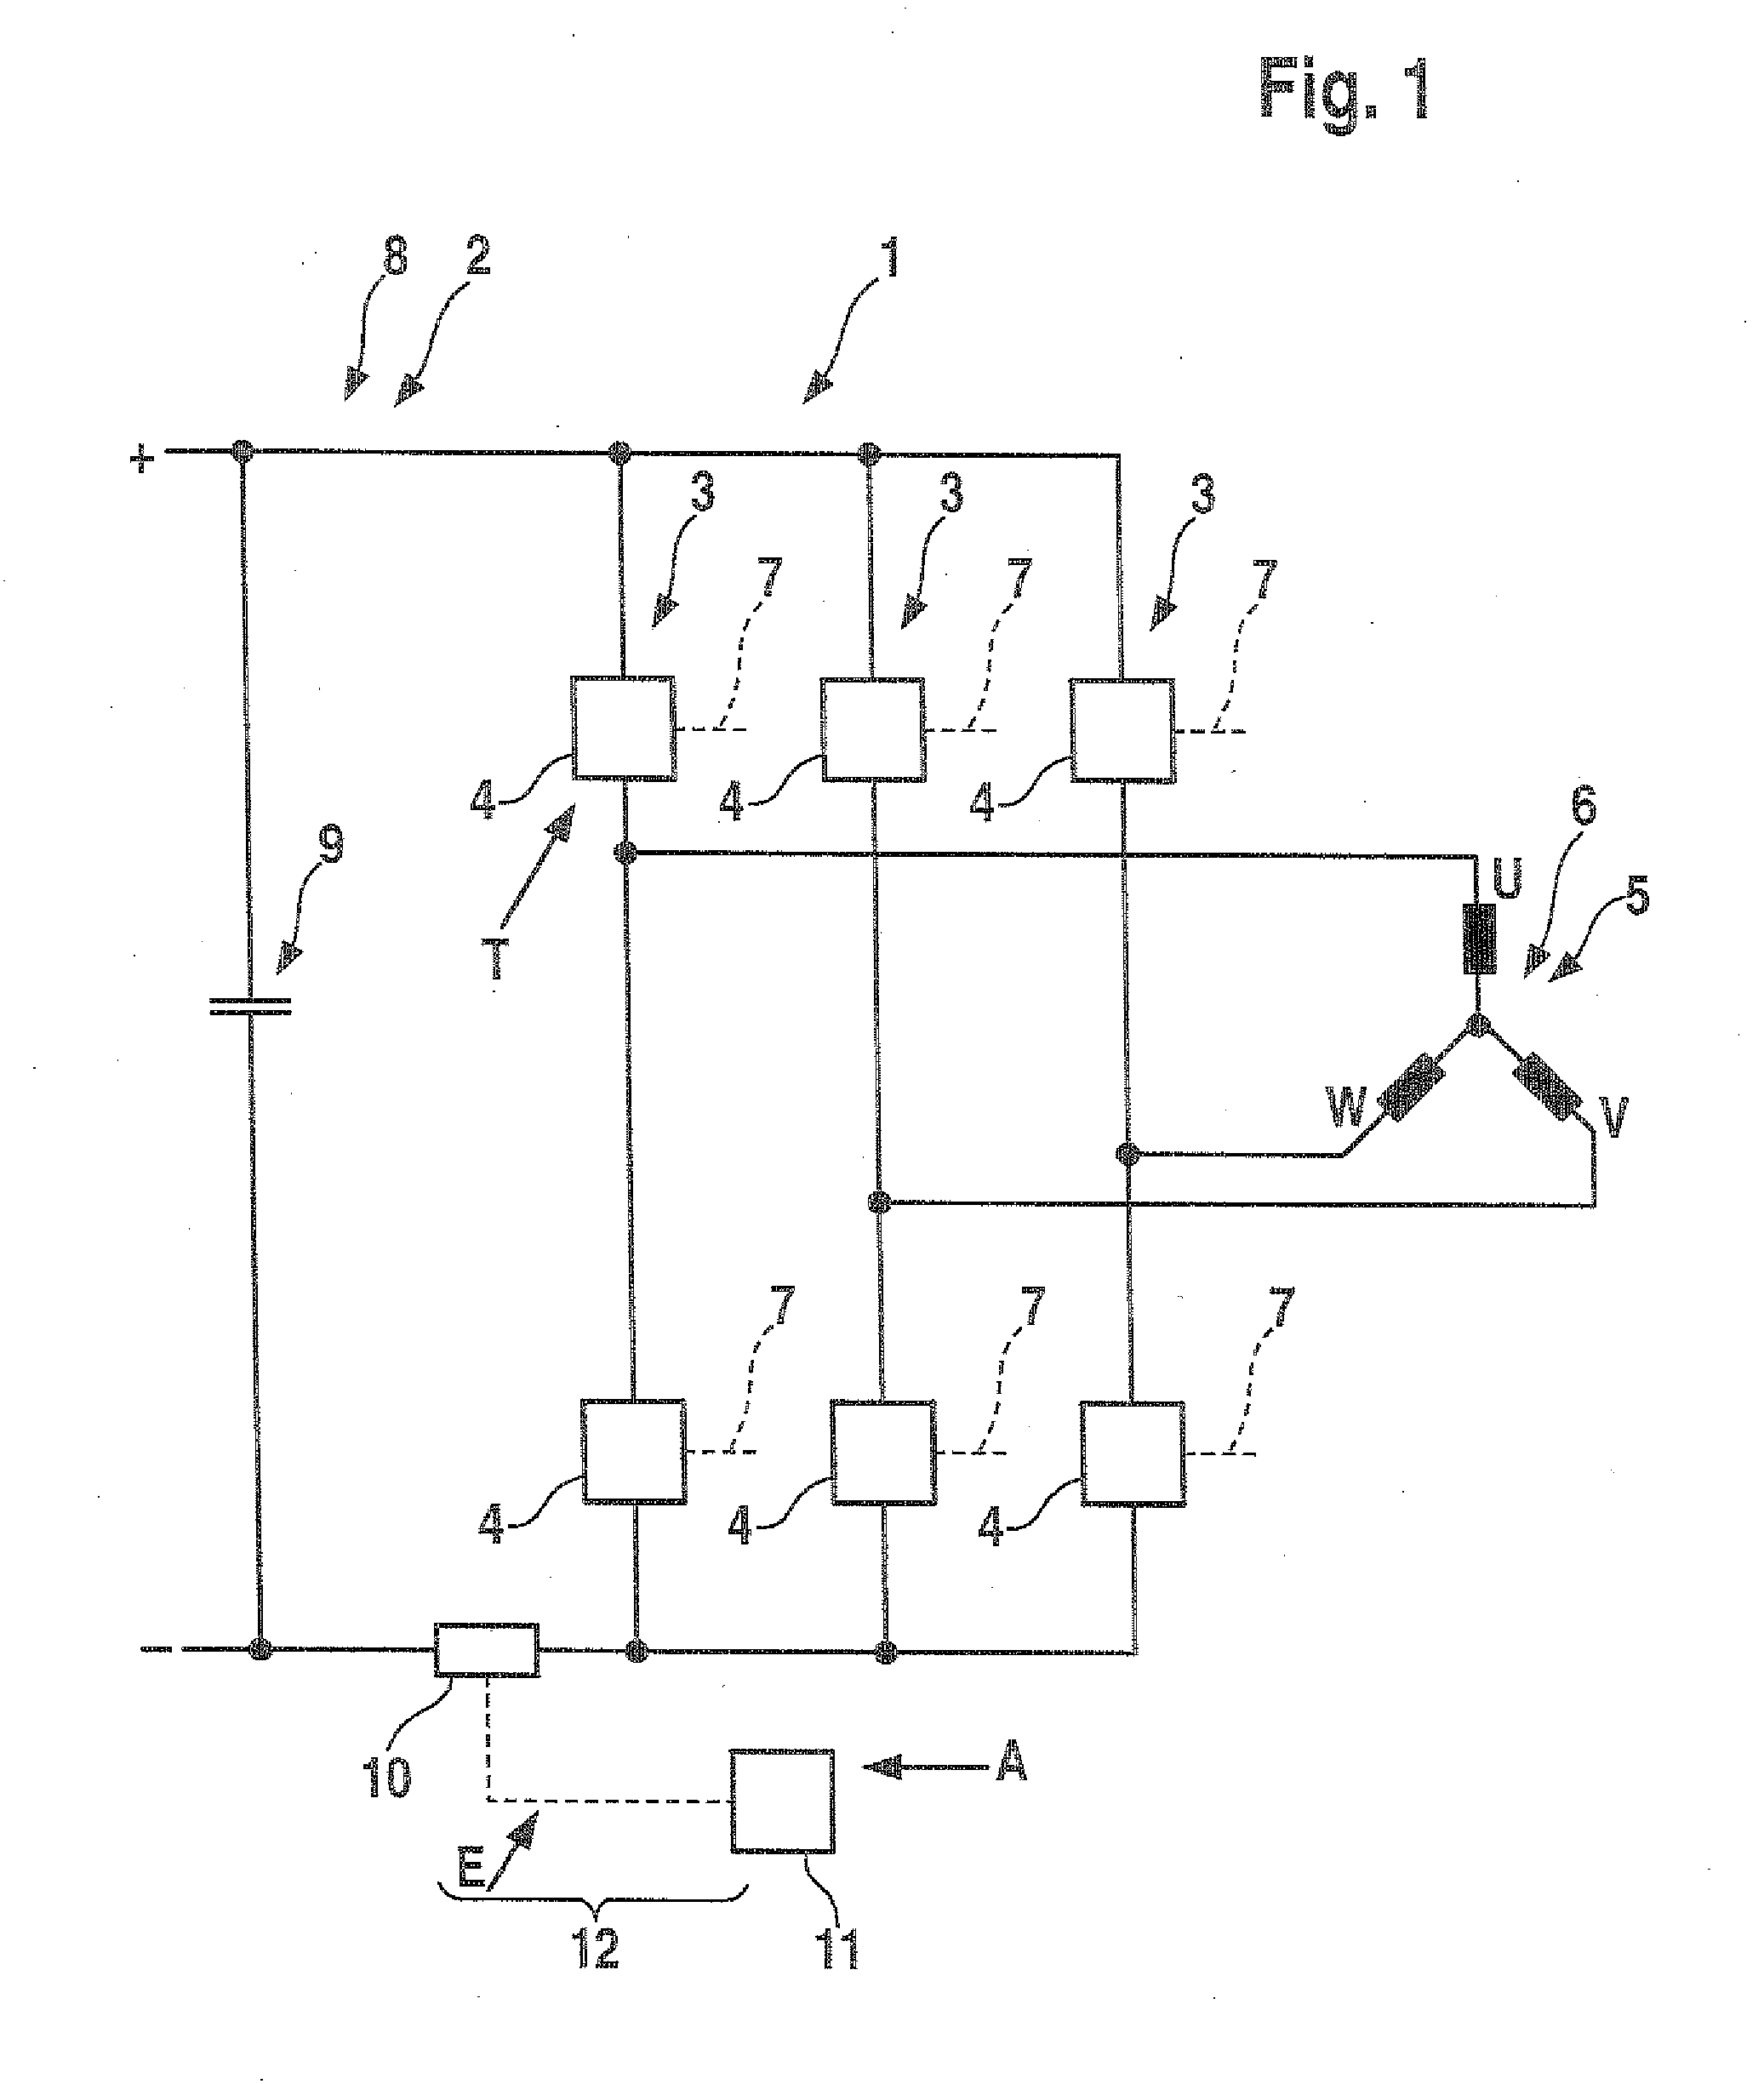 Method and apparatus for current measurement in an electrical network, in particular a multiphase electrical network